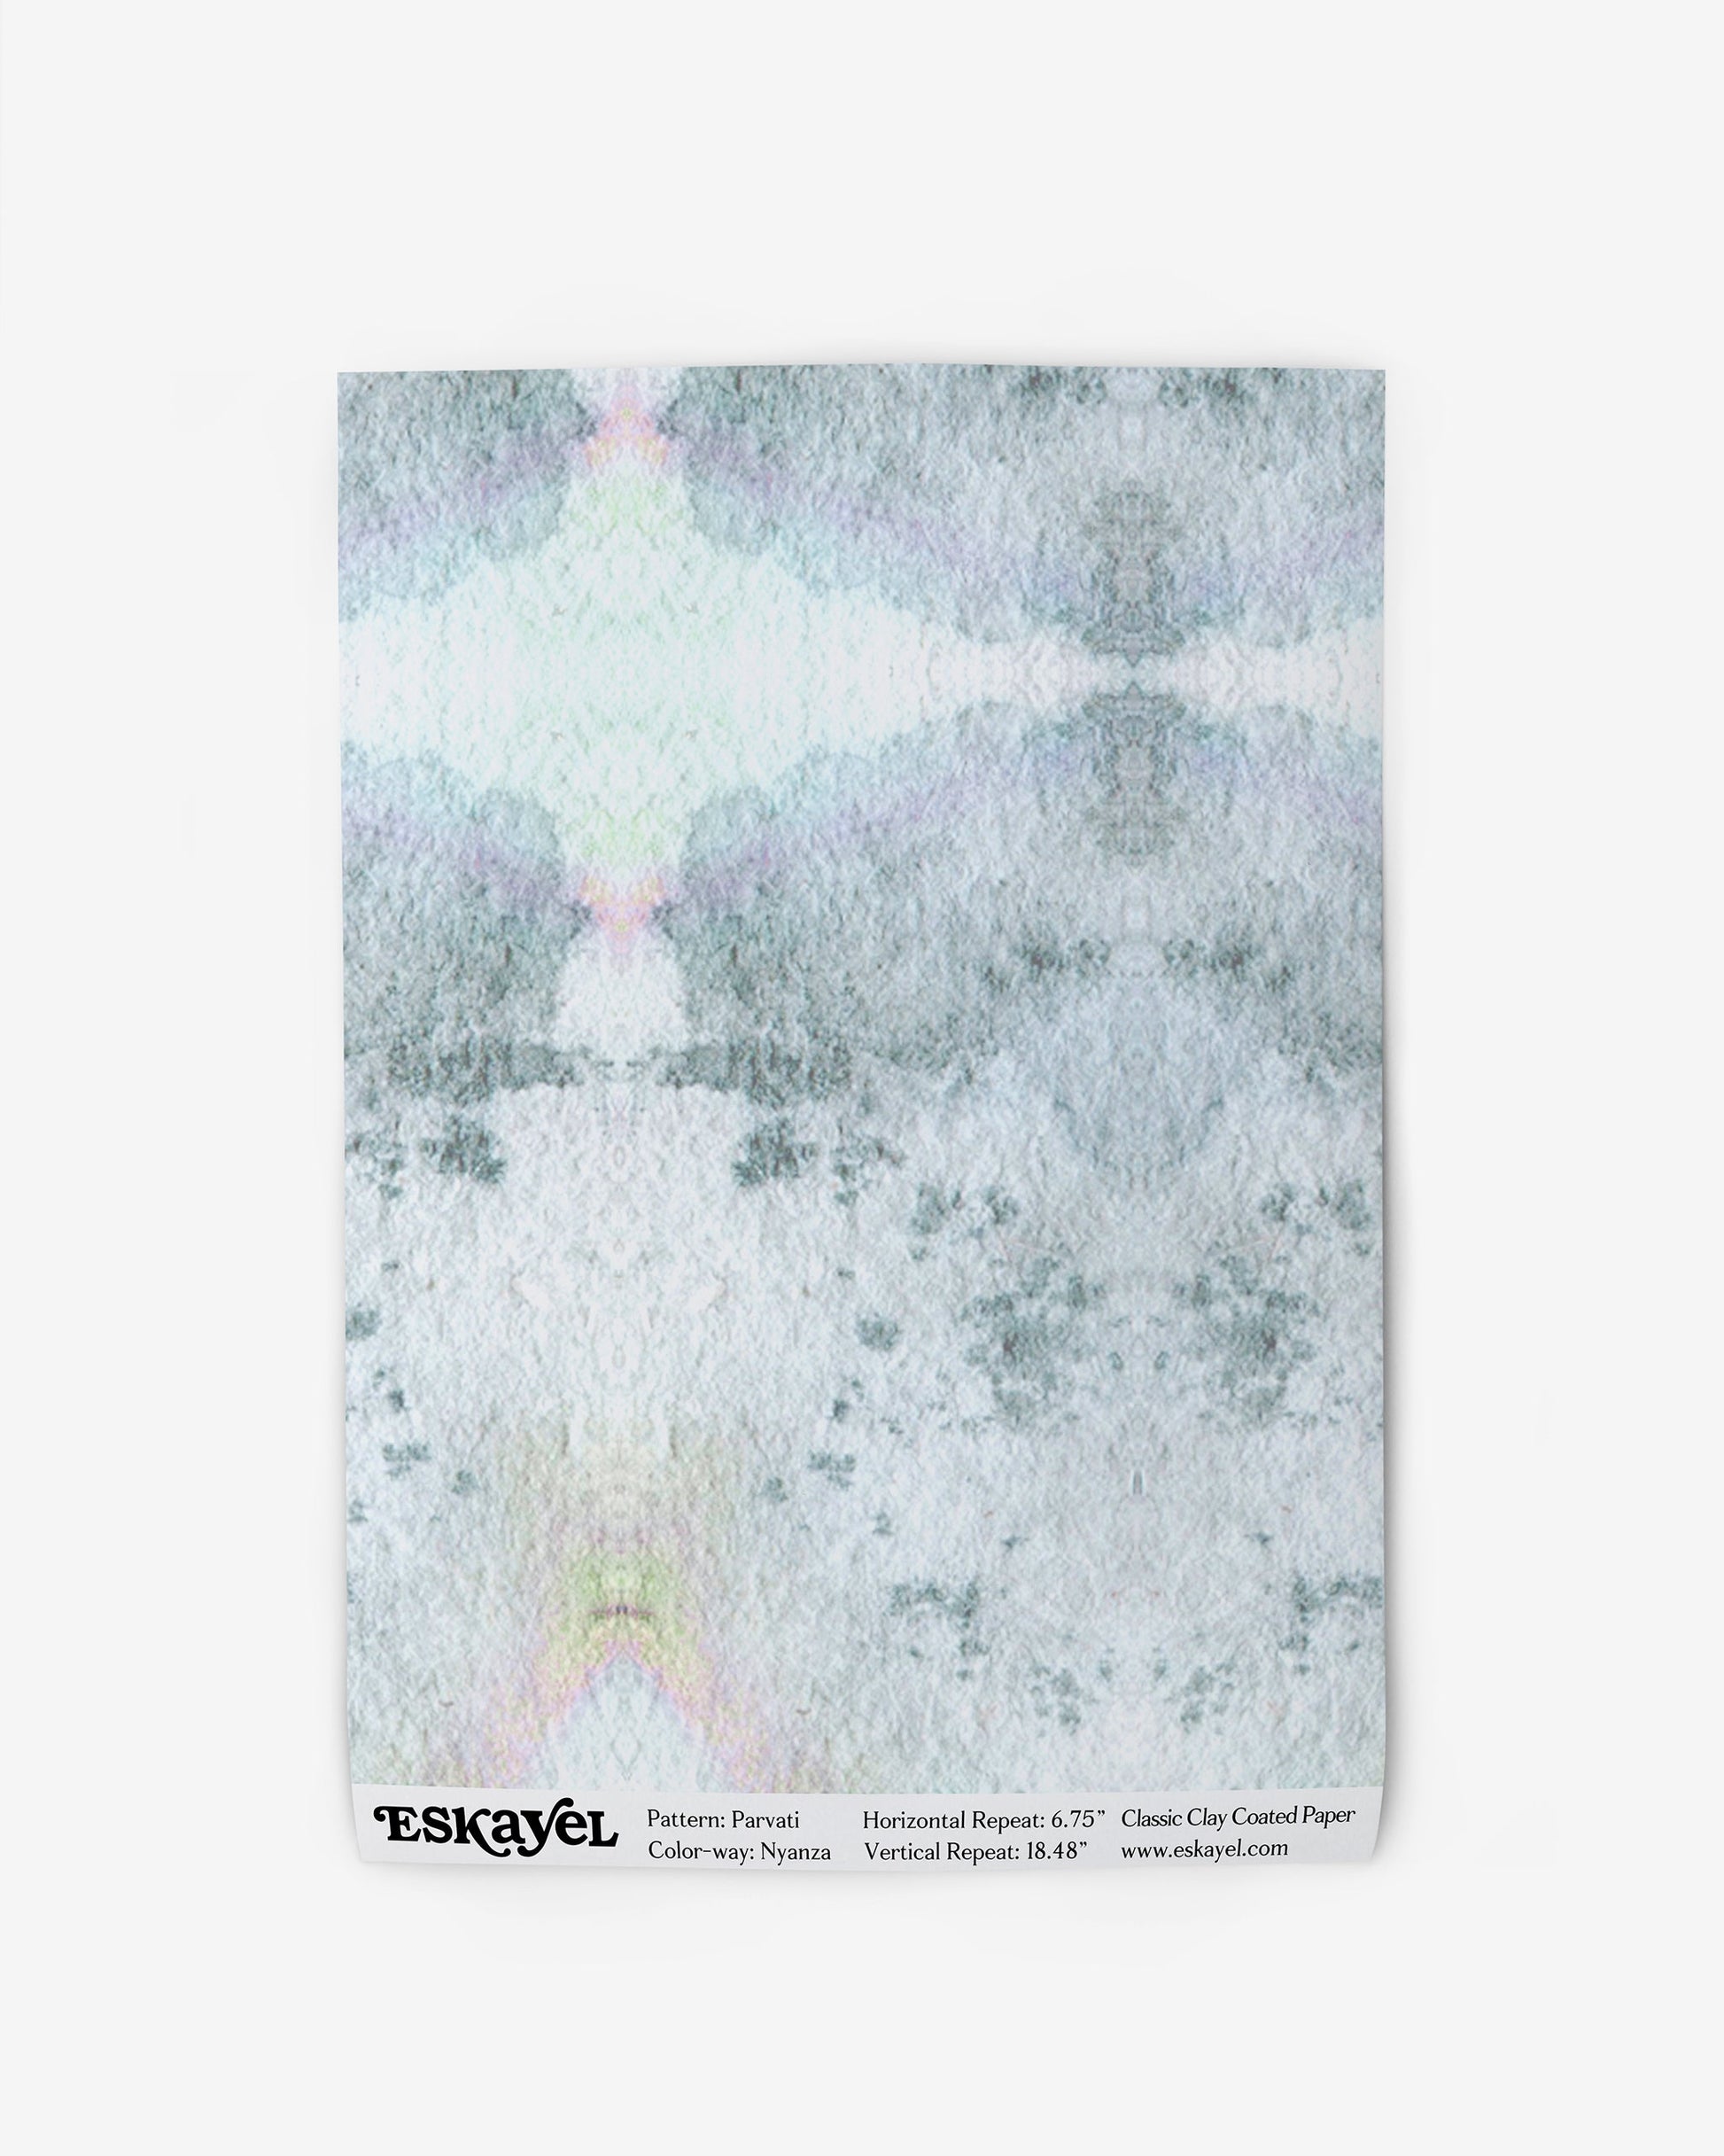 A wallpaper with an abstract design from the Parvati Wallpaper Nyanza, featuring the Eskayel pattern